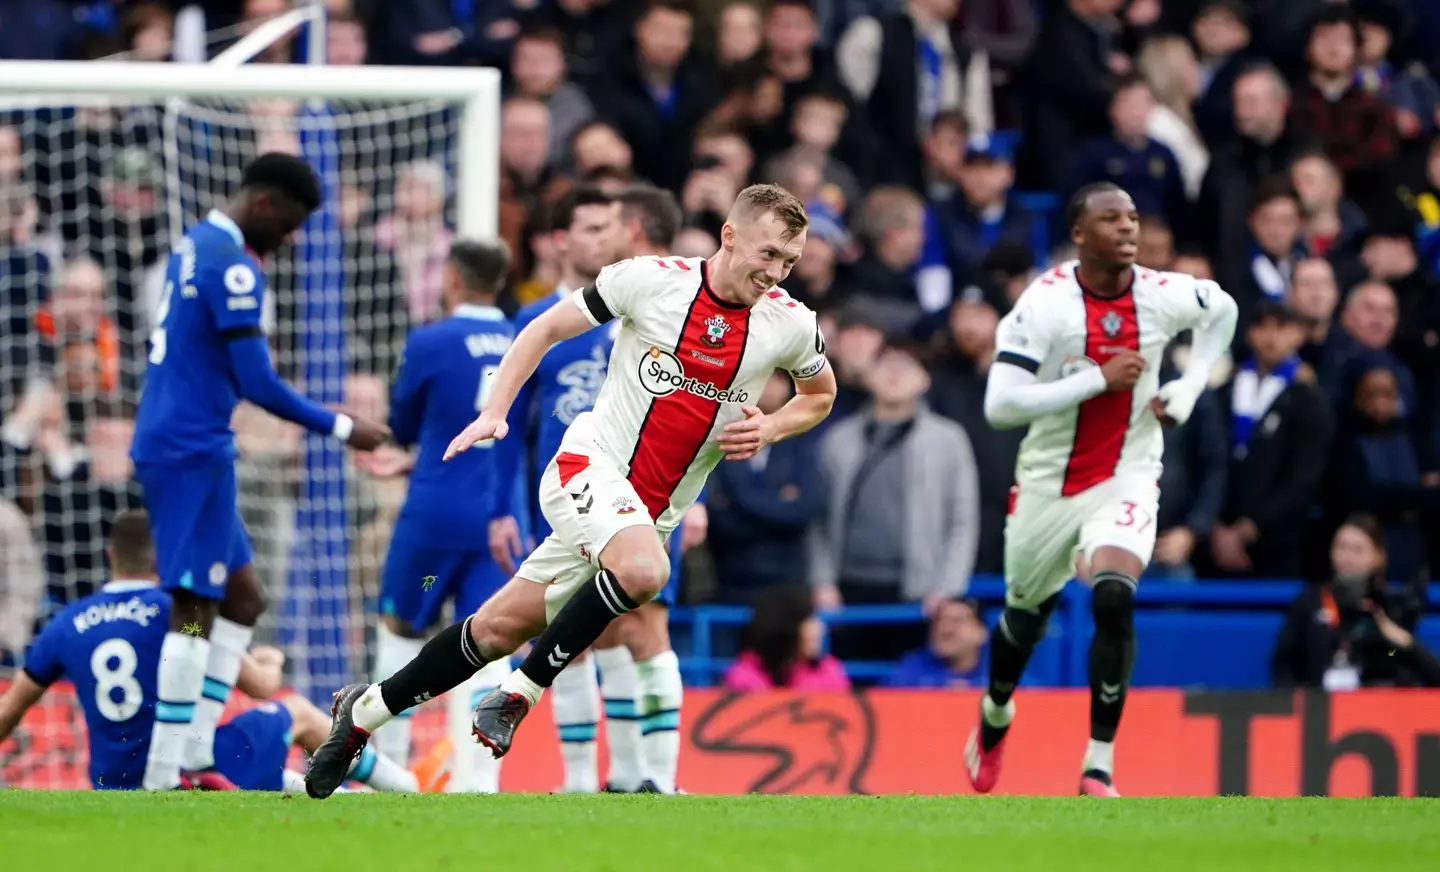 Ward-Prowse wheels away in celebration after scoring his 17th free-kick in the Premier League. (Image